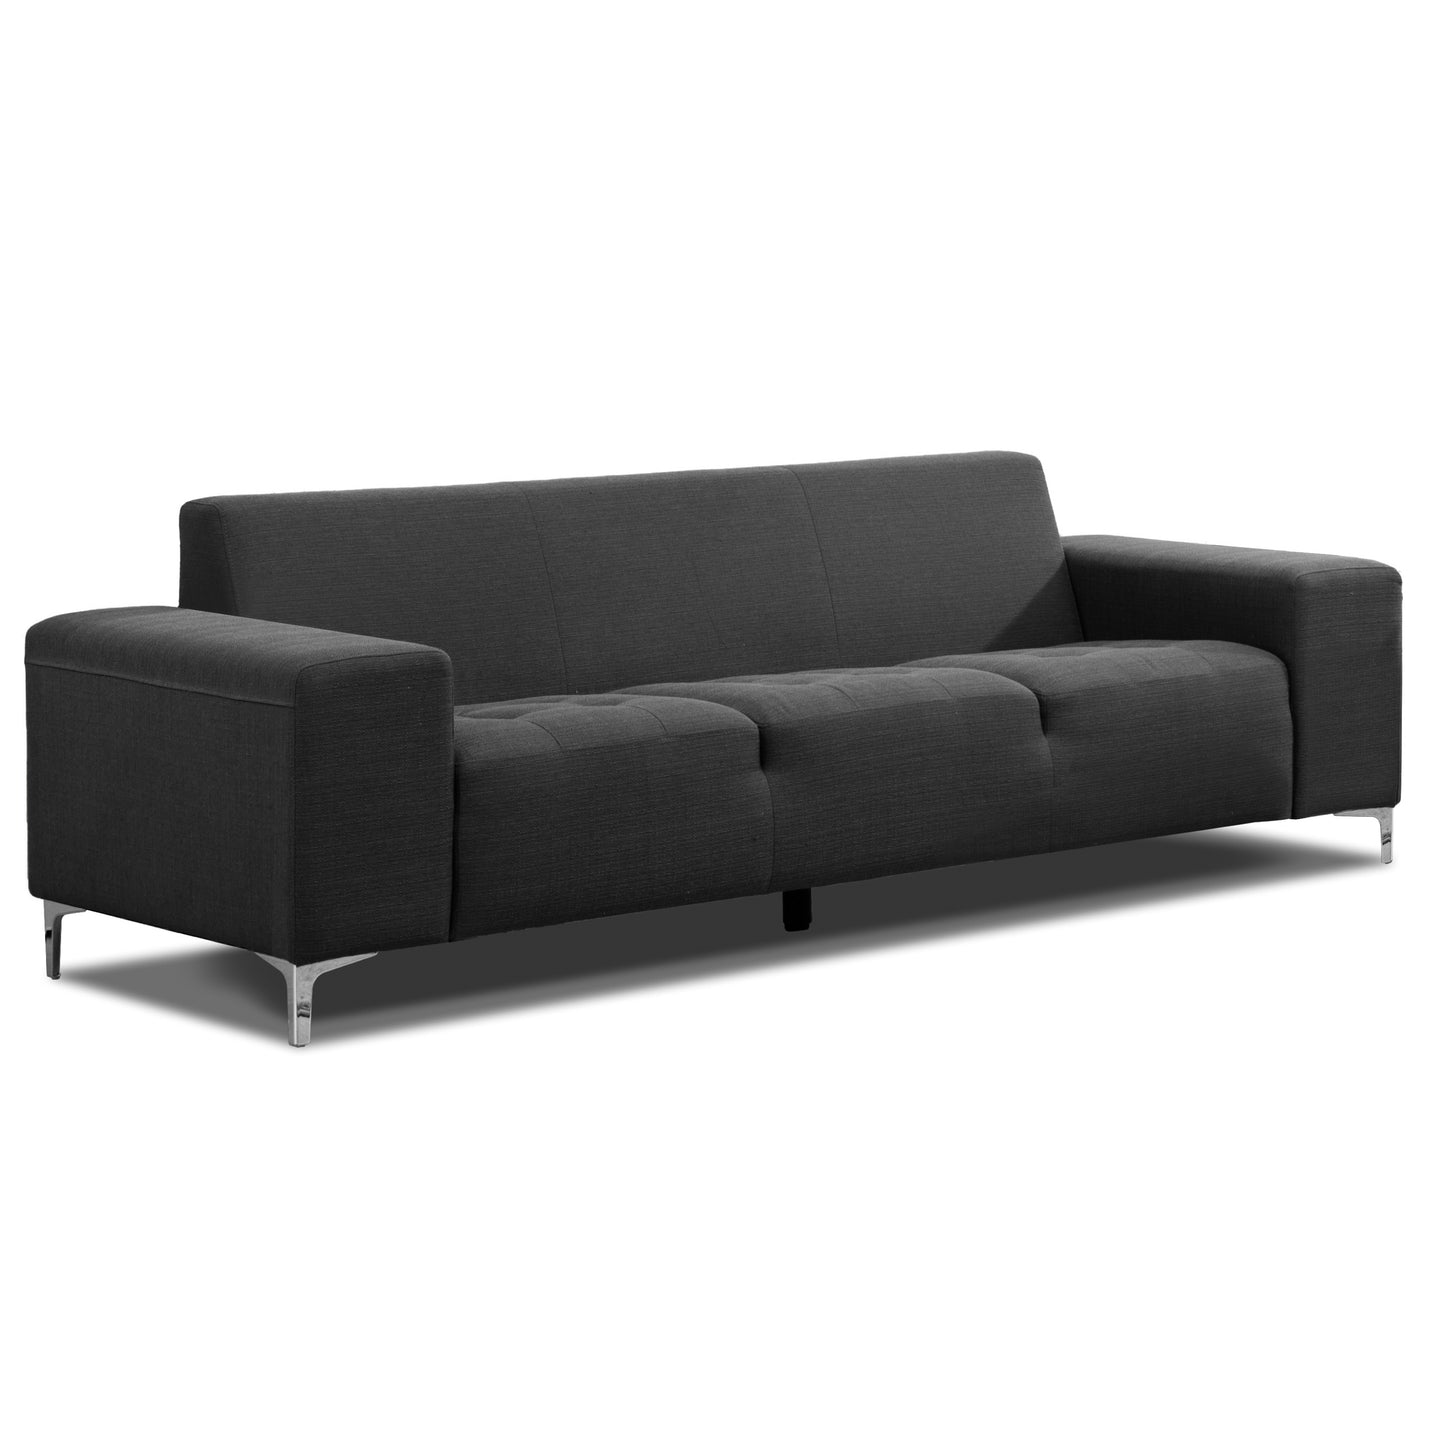 Alicia Modern Charcoal Grey Fabric Sofa with Square Arms